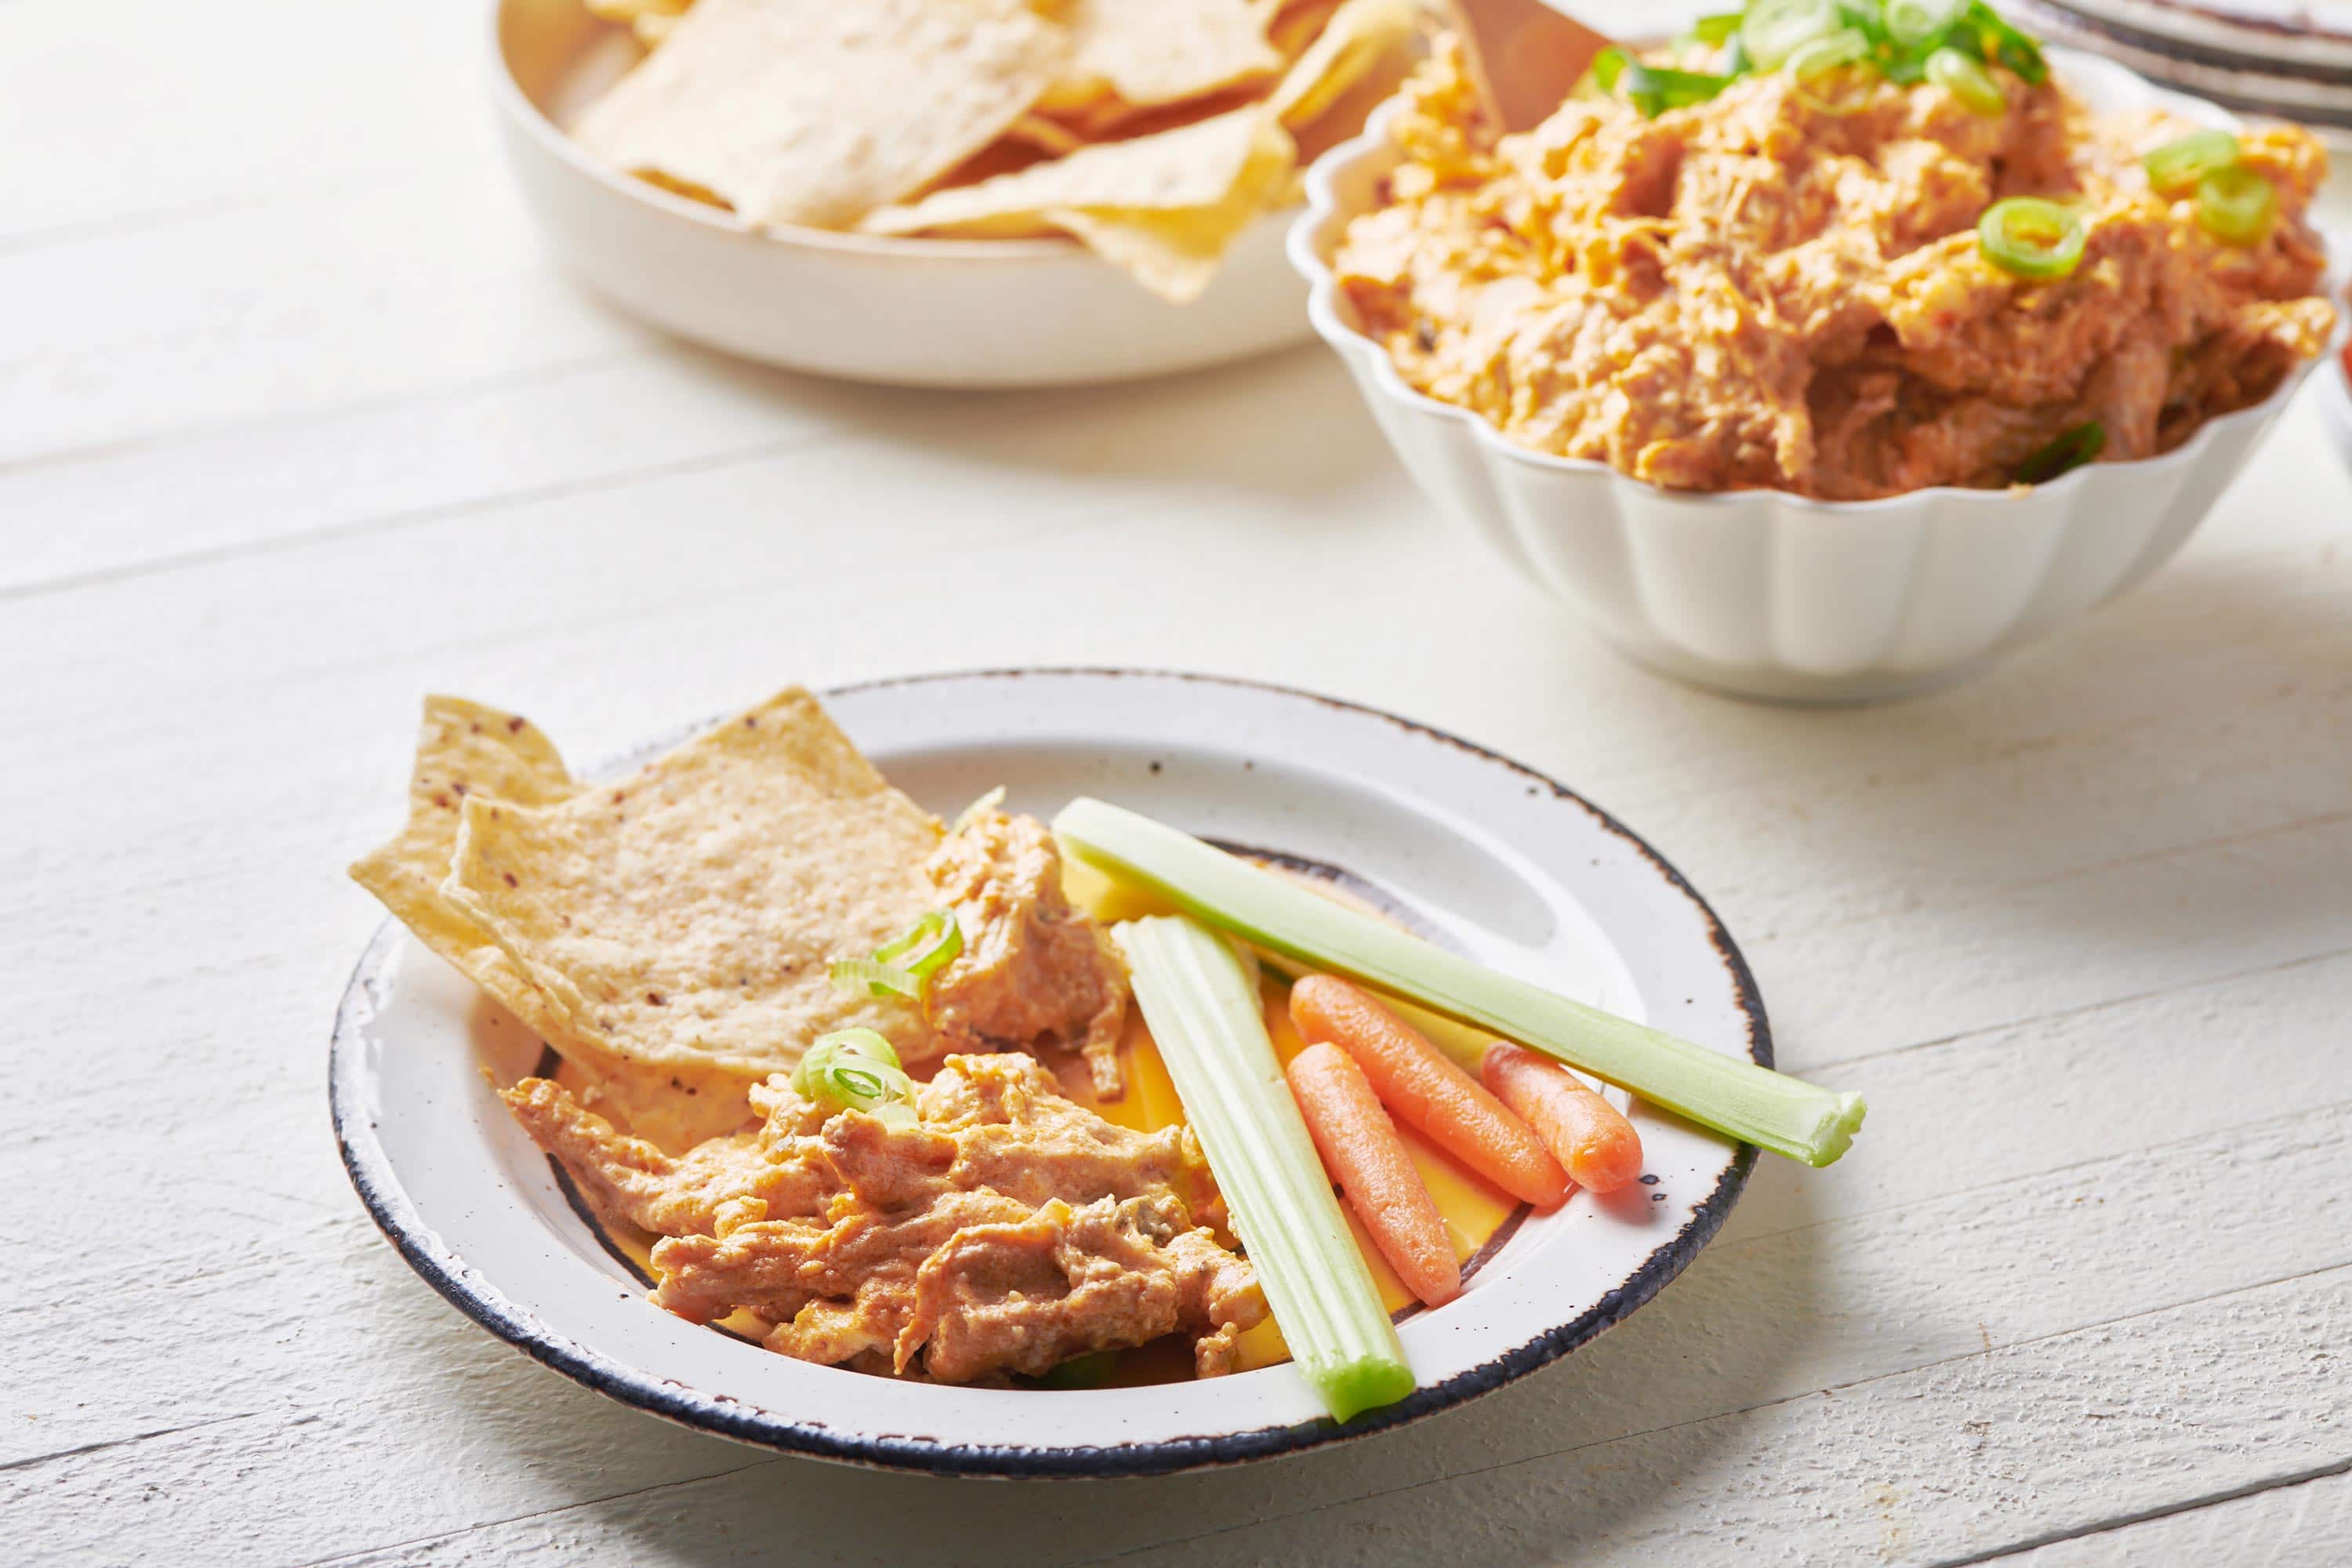 Carrots, celery, and chips on a plate with Buffalo Chicken Dip.